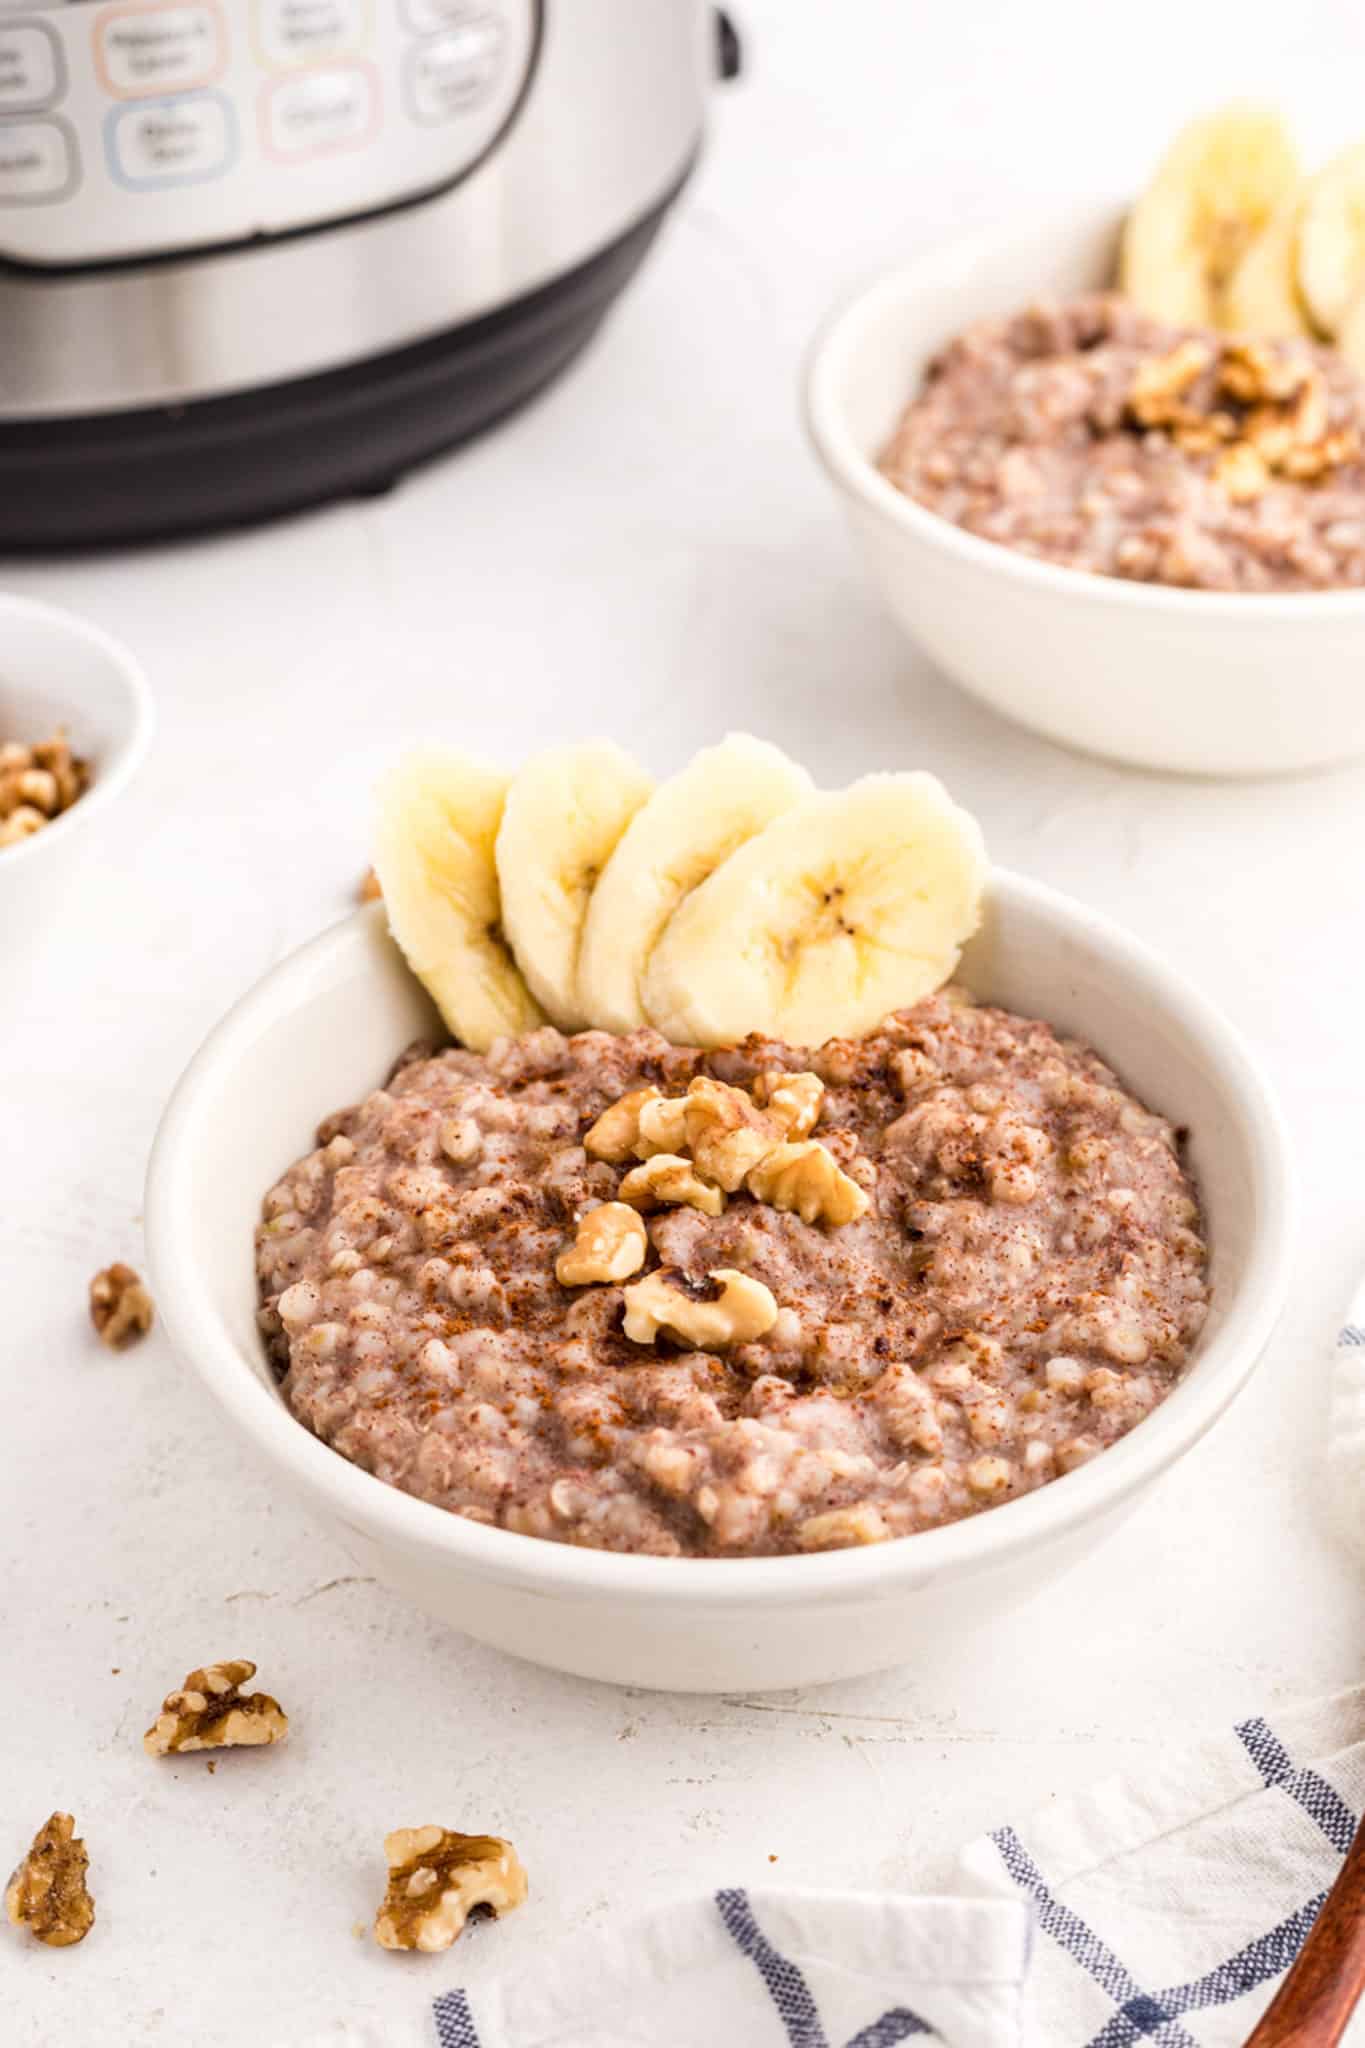 Two small bowls of buckwheat porridge topped with bananas and walnuts.